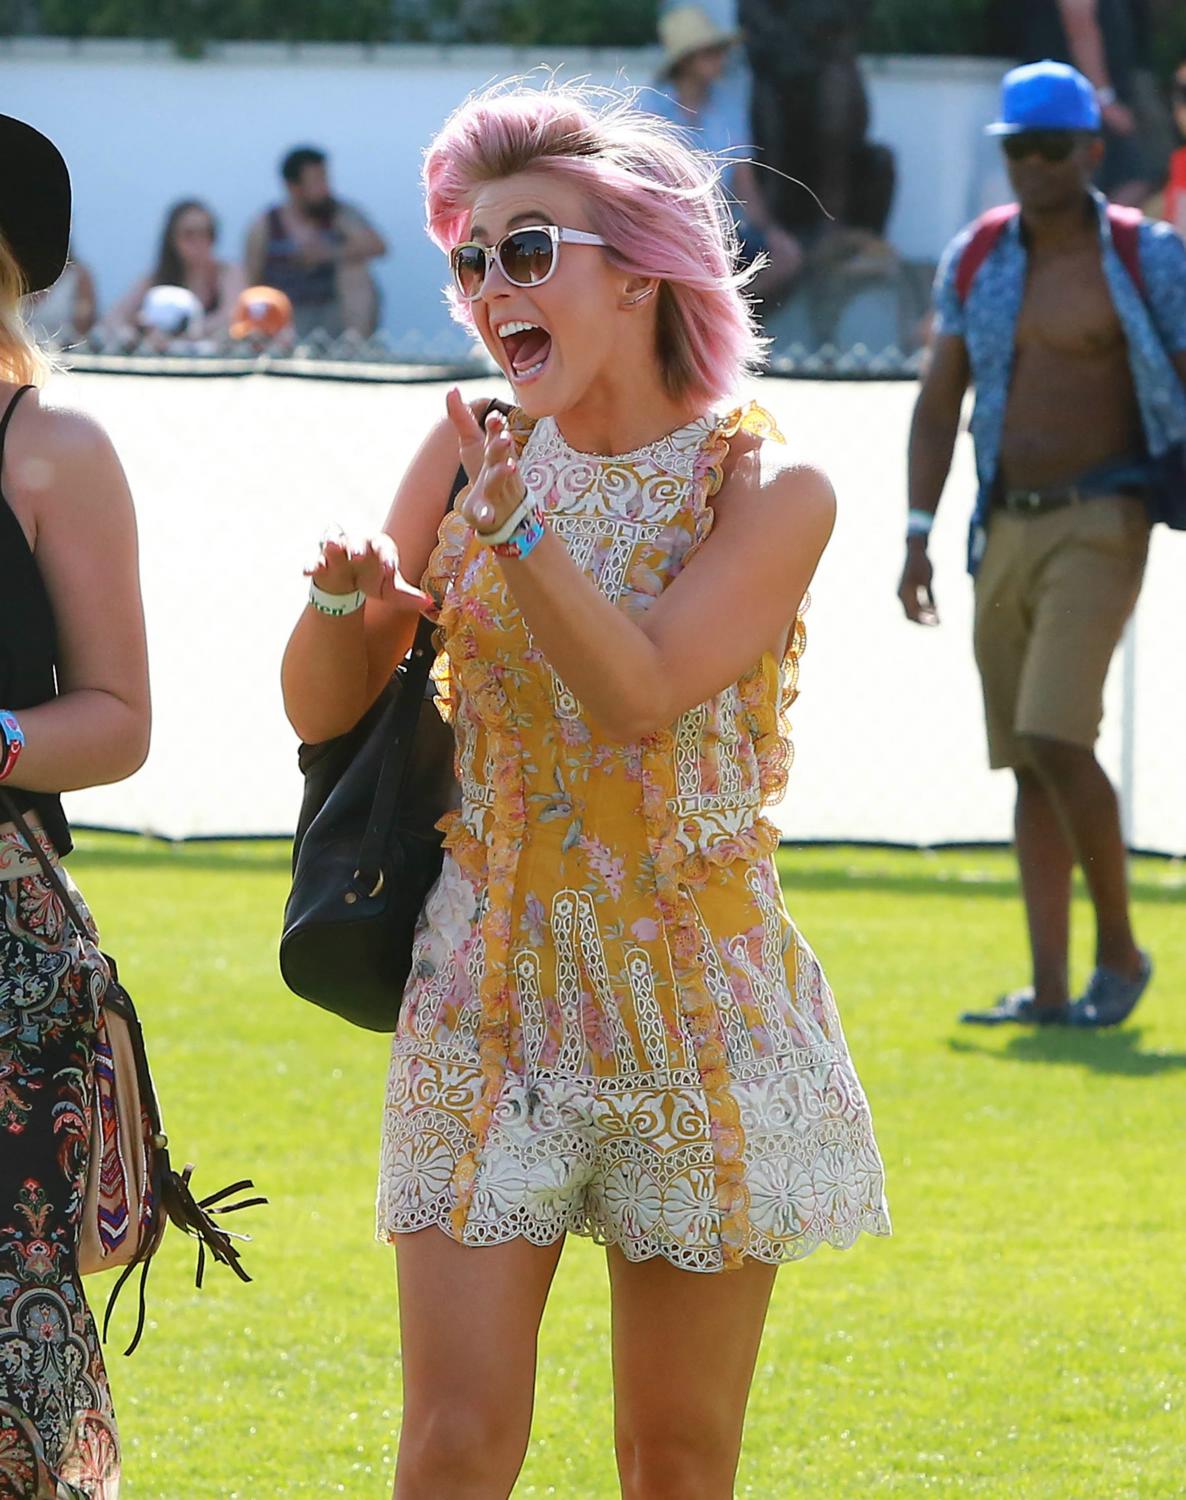 Julianne Hough and Aaron Paul with Lauren Parsekian at The Coachella Valley Music